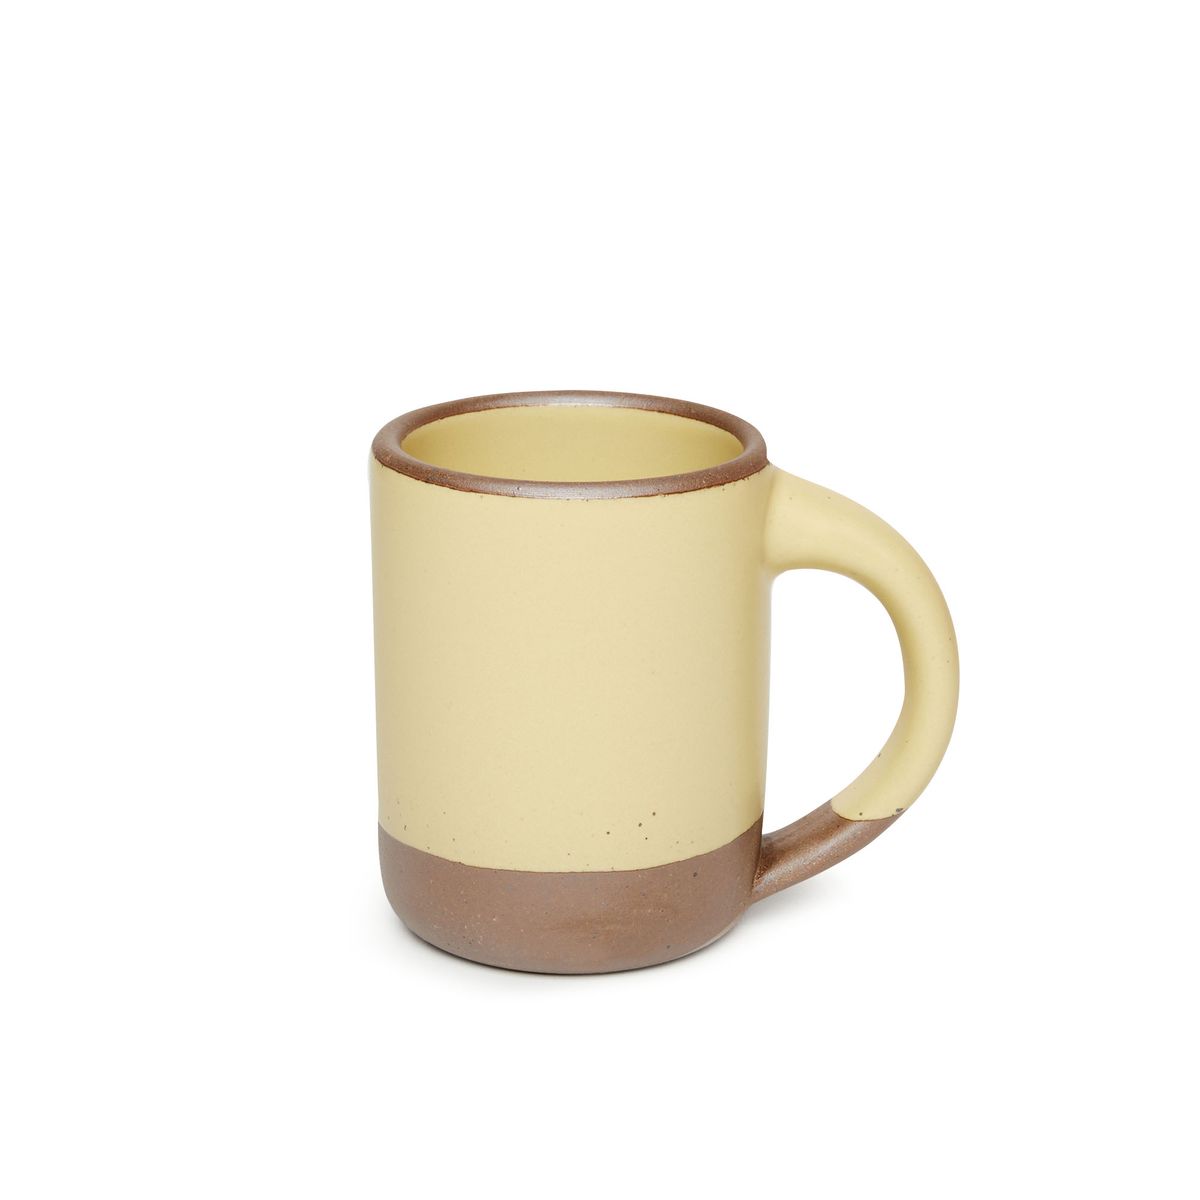 A medium sized ceramic mug with handle in a light butter yellow color featuring iron speckles and unglazed rim and bottom base